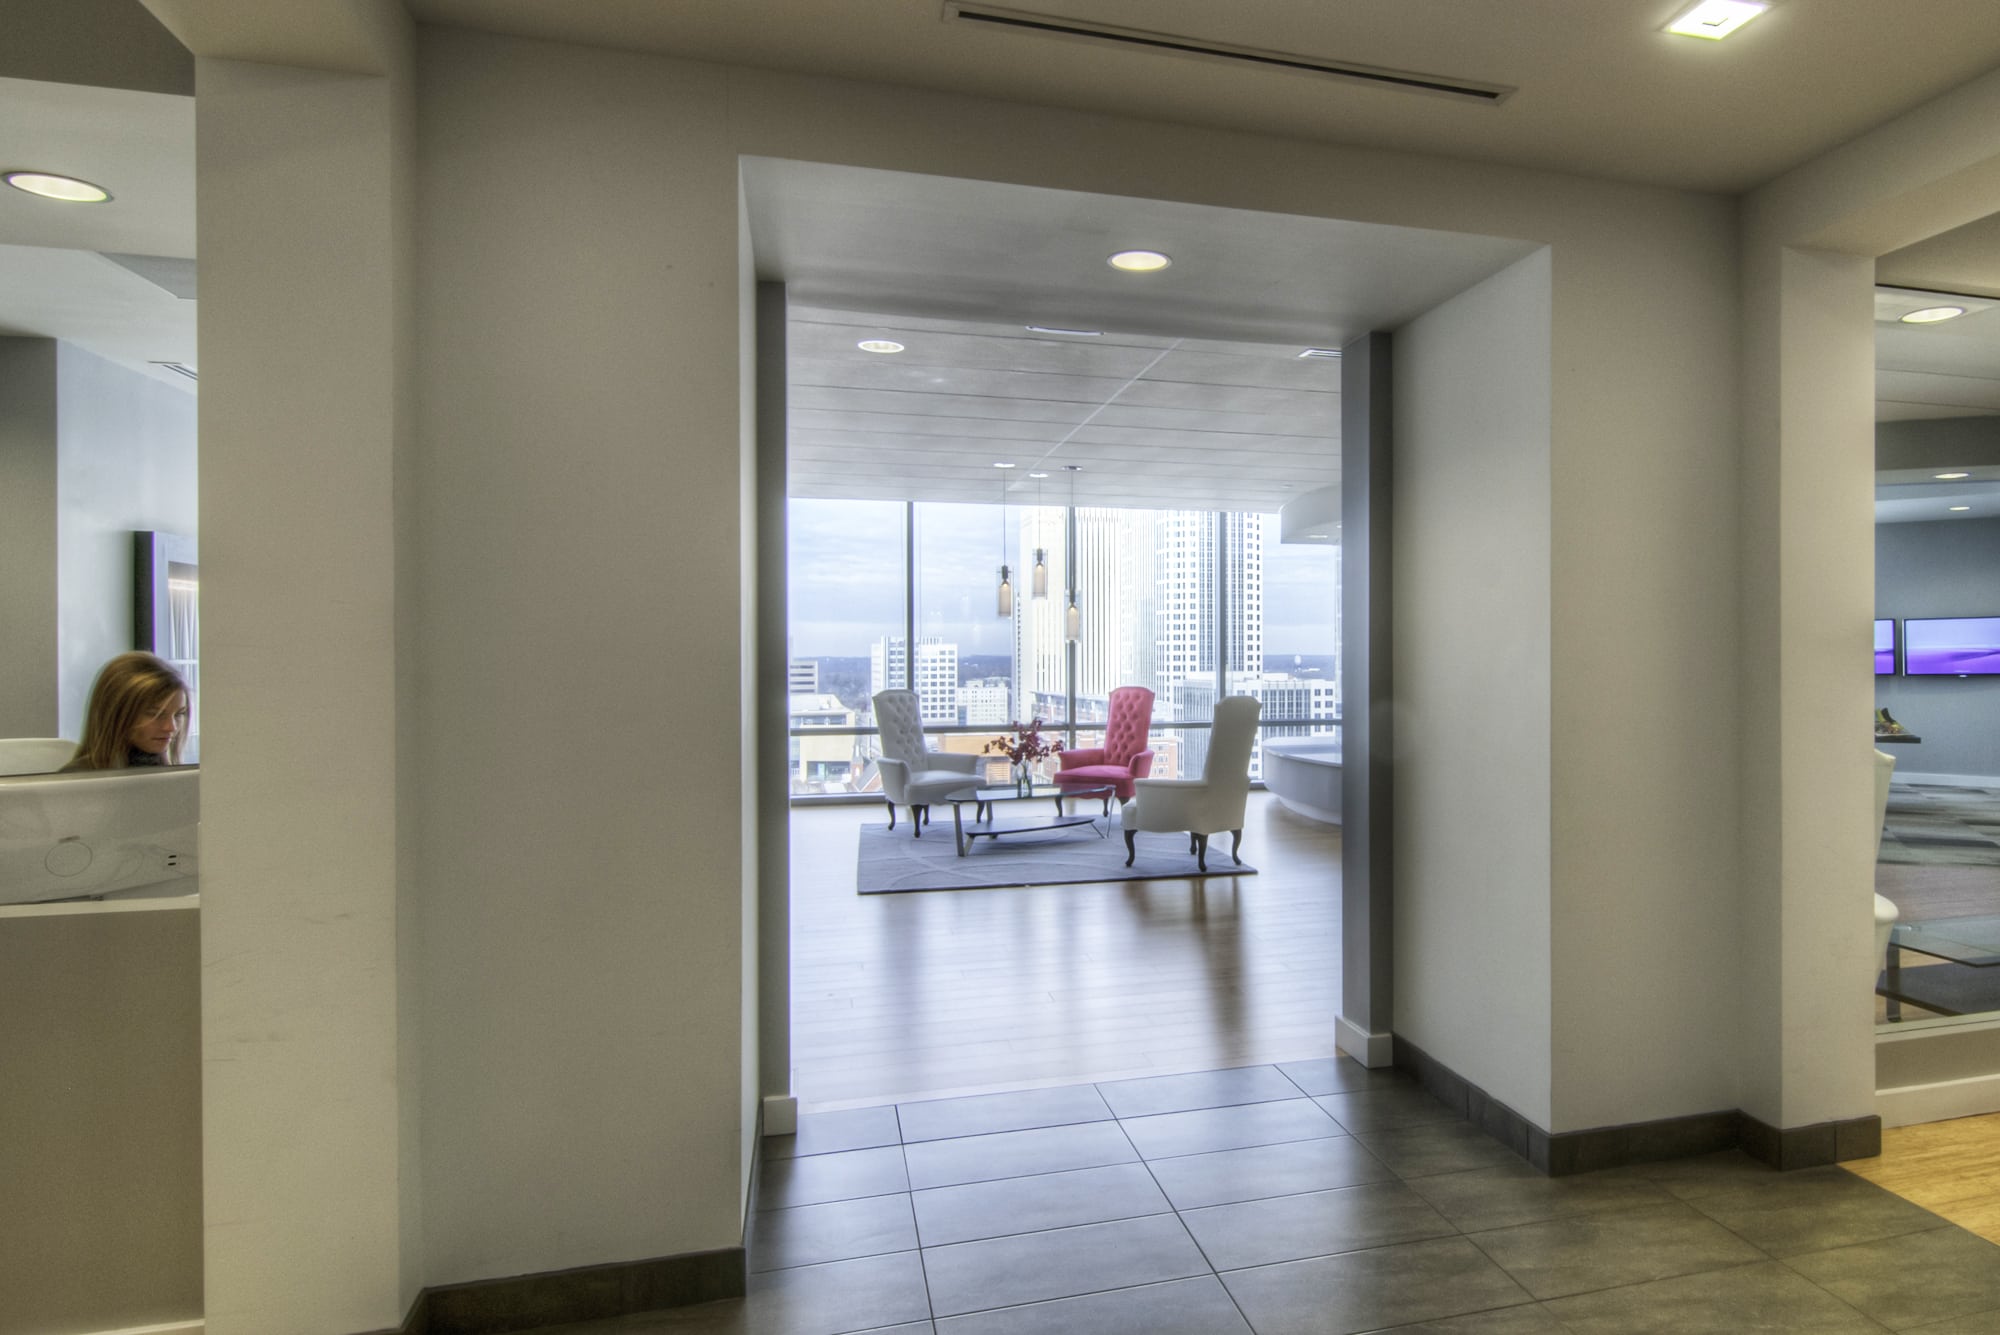 The lobby of a modern office building with a view of the city.